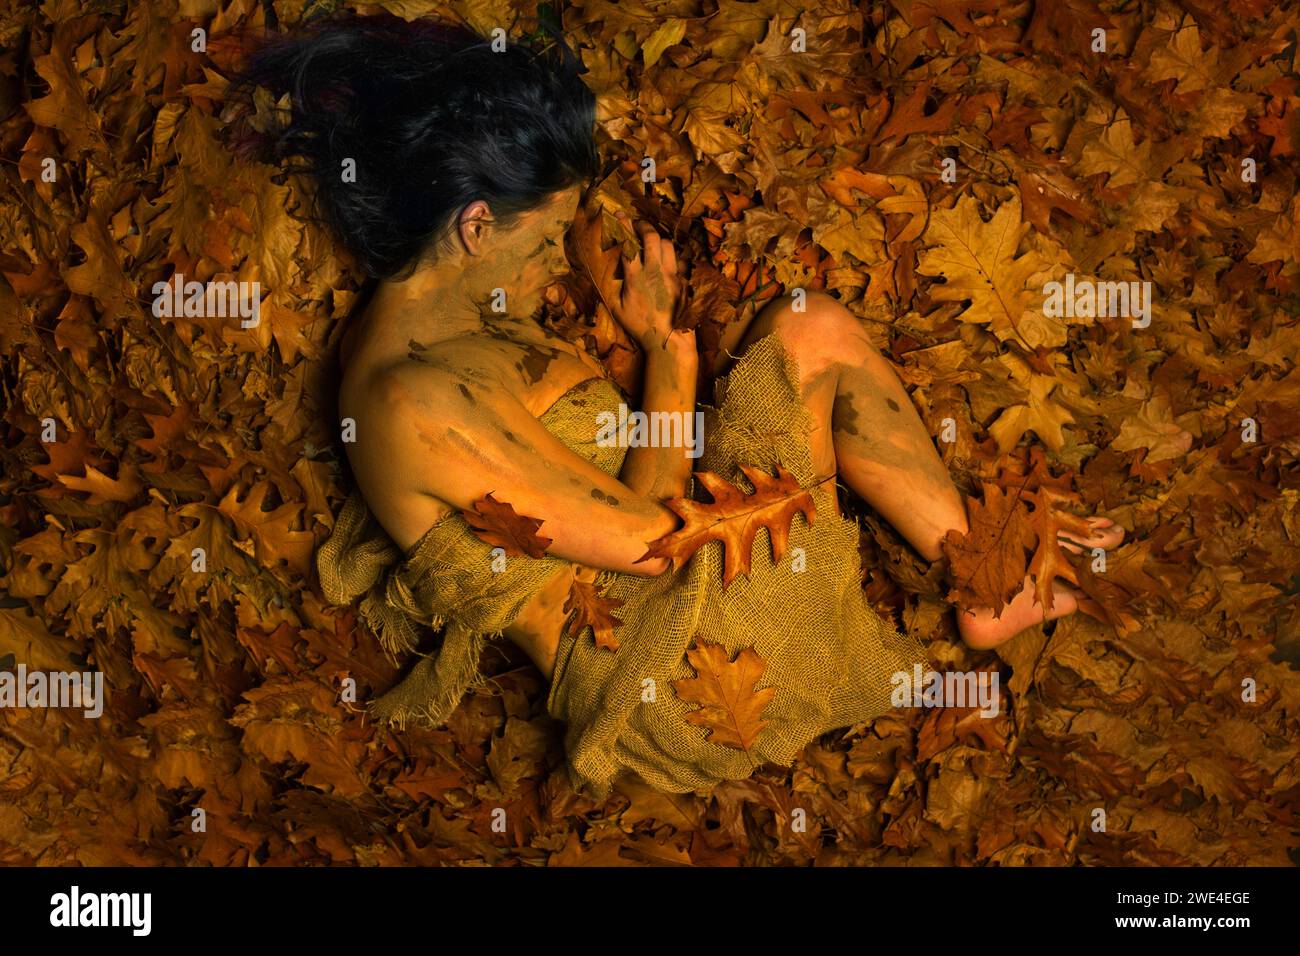 Girl lying on a bed of leaves coverd in mud Stock Photo